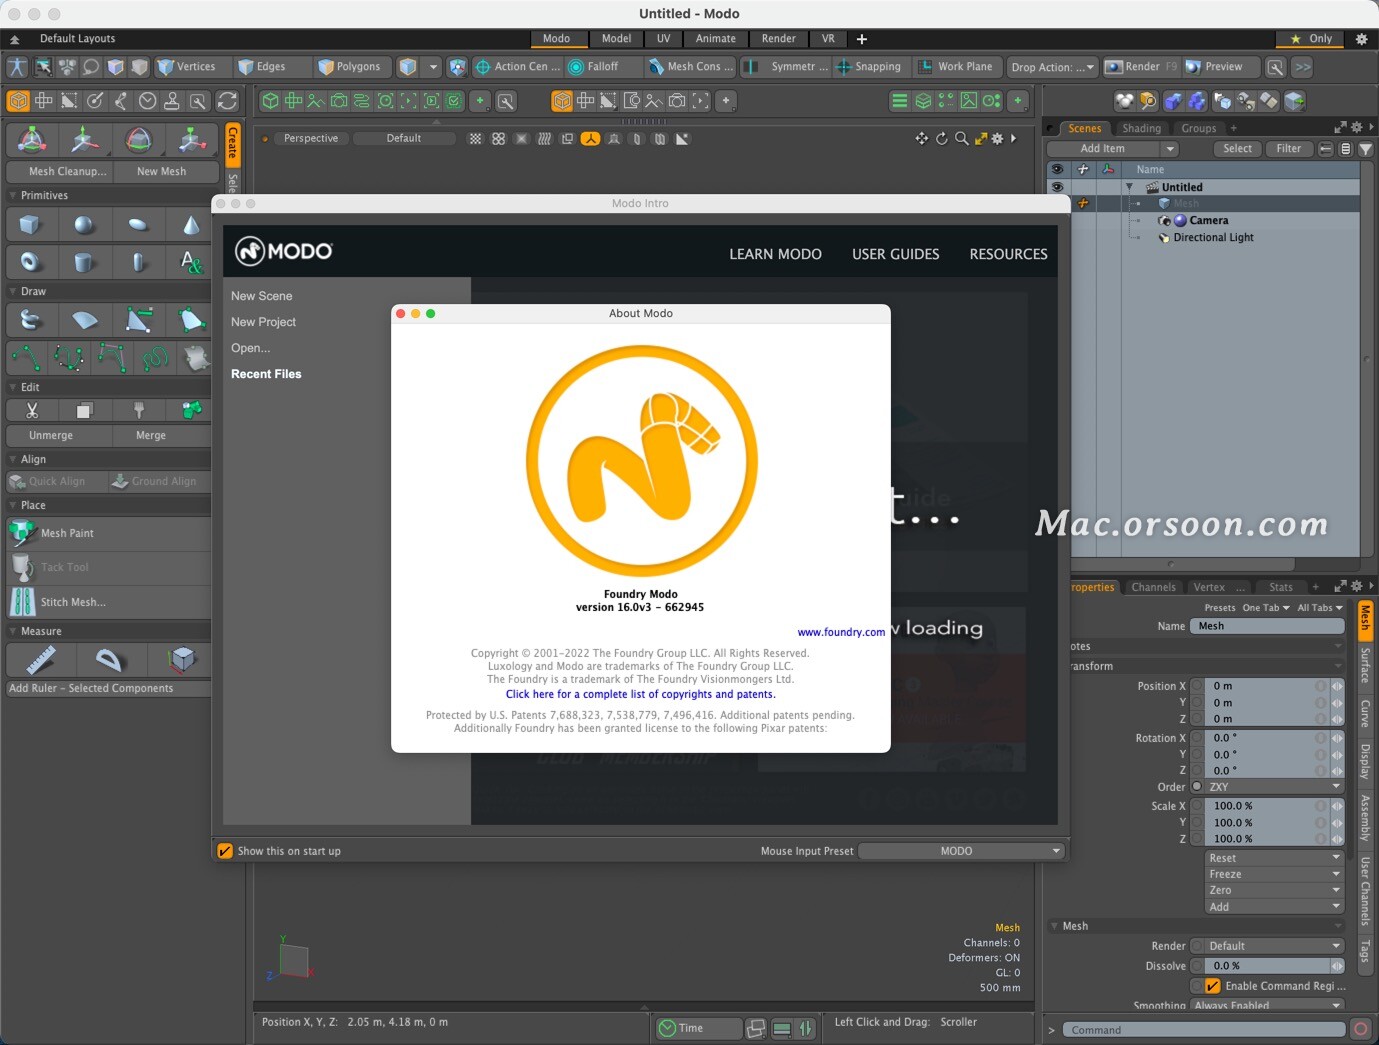 download the new version The Foundry MODO 16.1v8